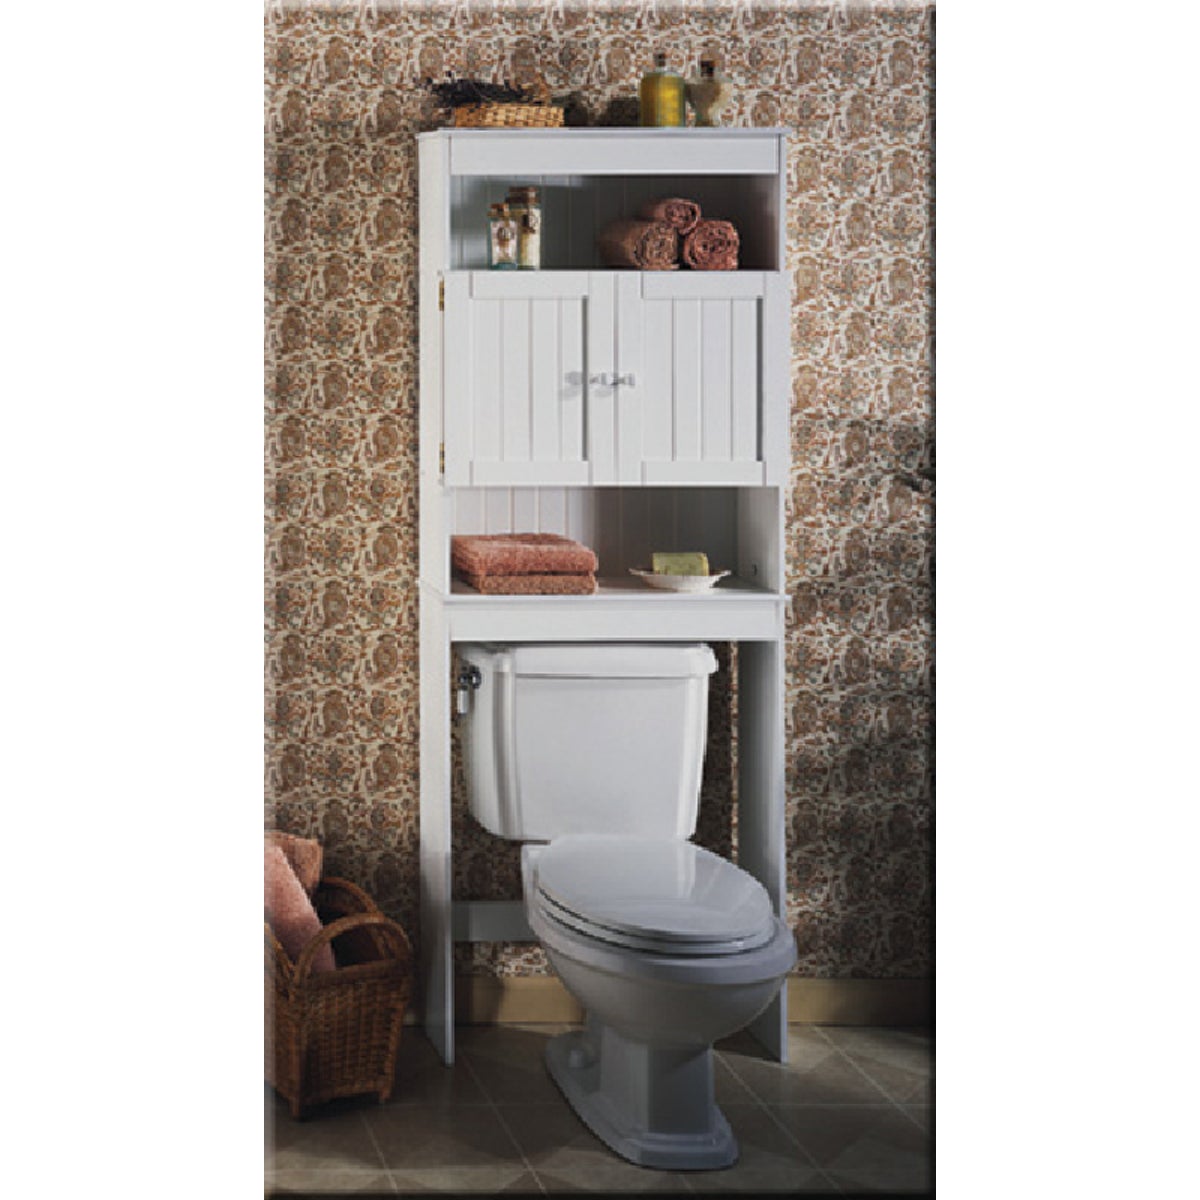 Zenith Country Cottage White Over-the-Toilet Cabinet, 2 Door/3 Shelf